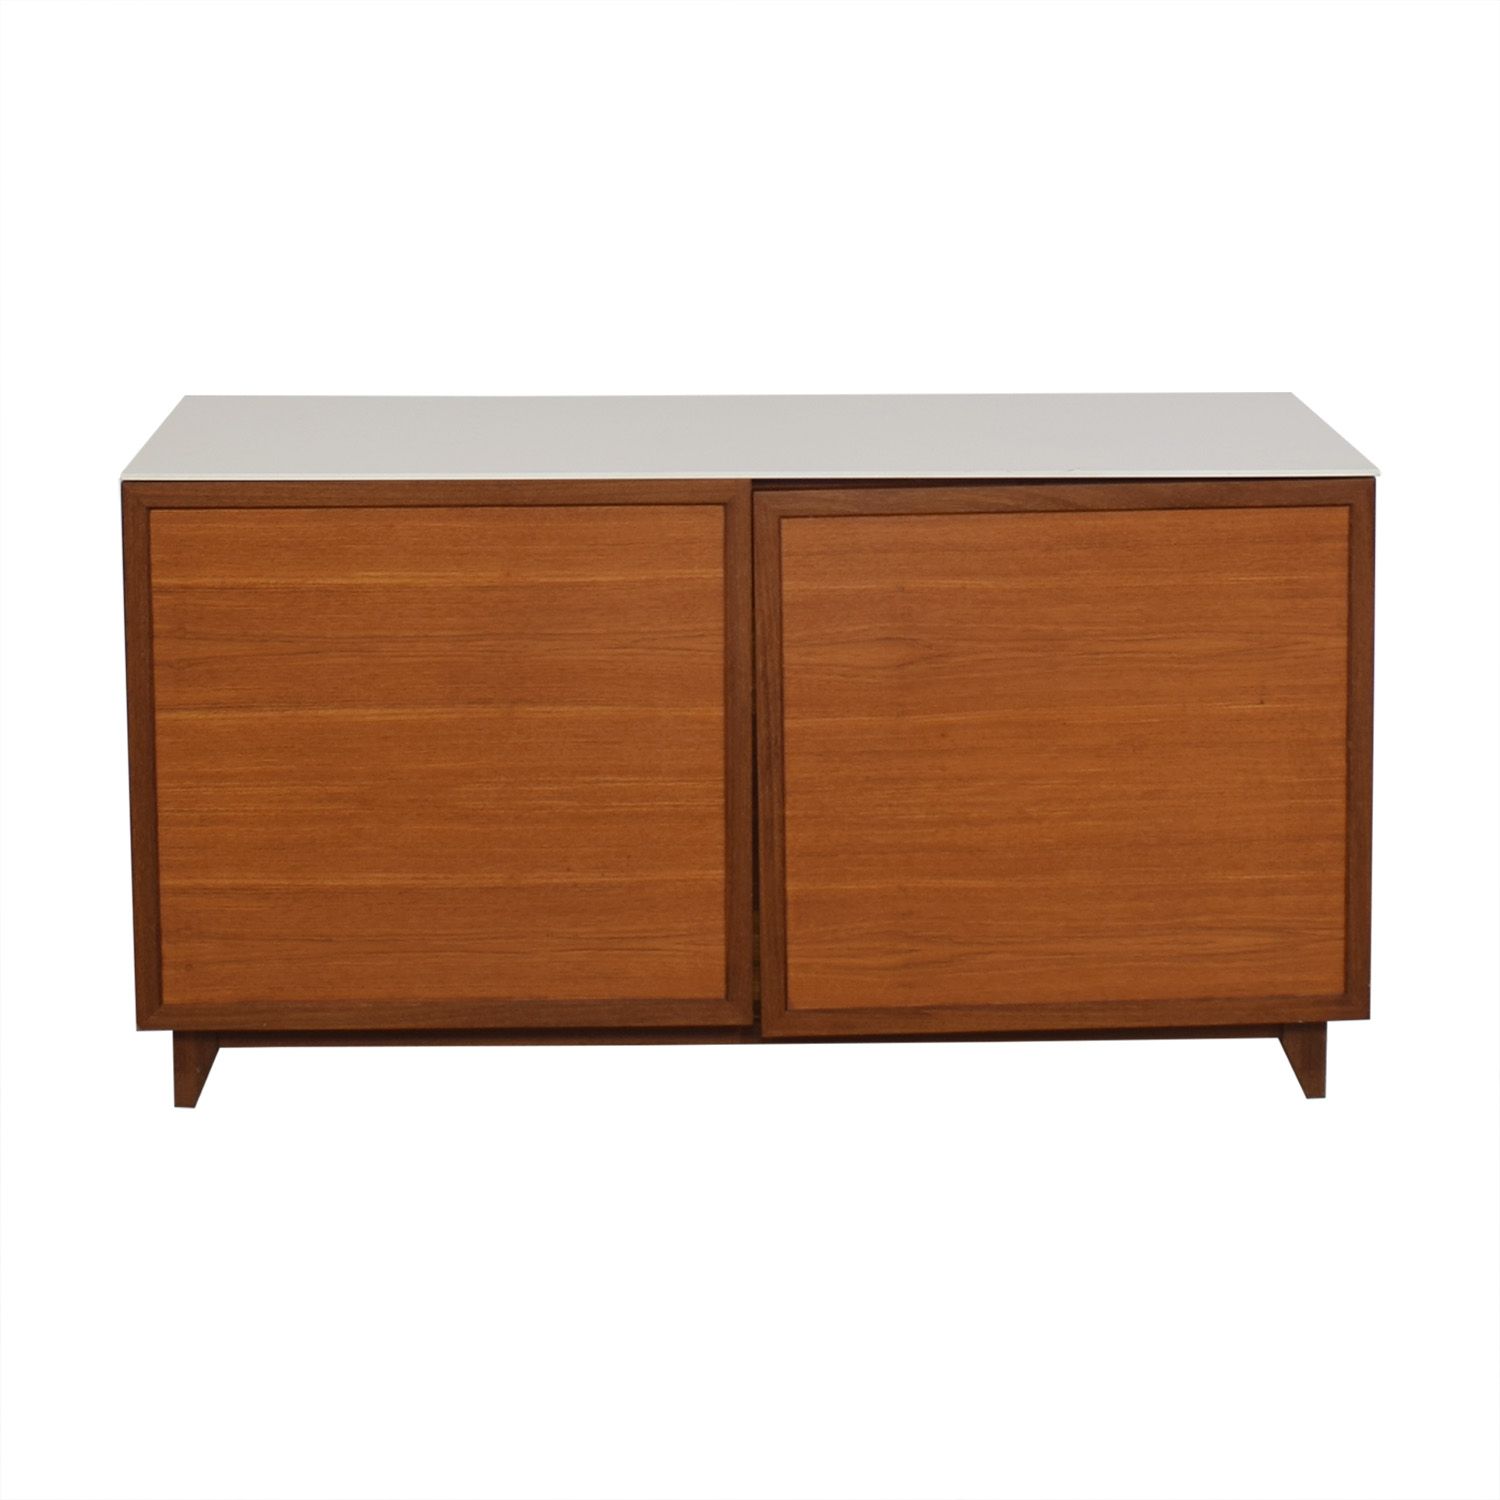 77% Off – Custom Mid Century Style Sideboard / Storage Throughout Mid Century Brown And Grey Sideboards (View 23 of 30)